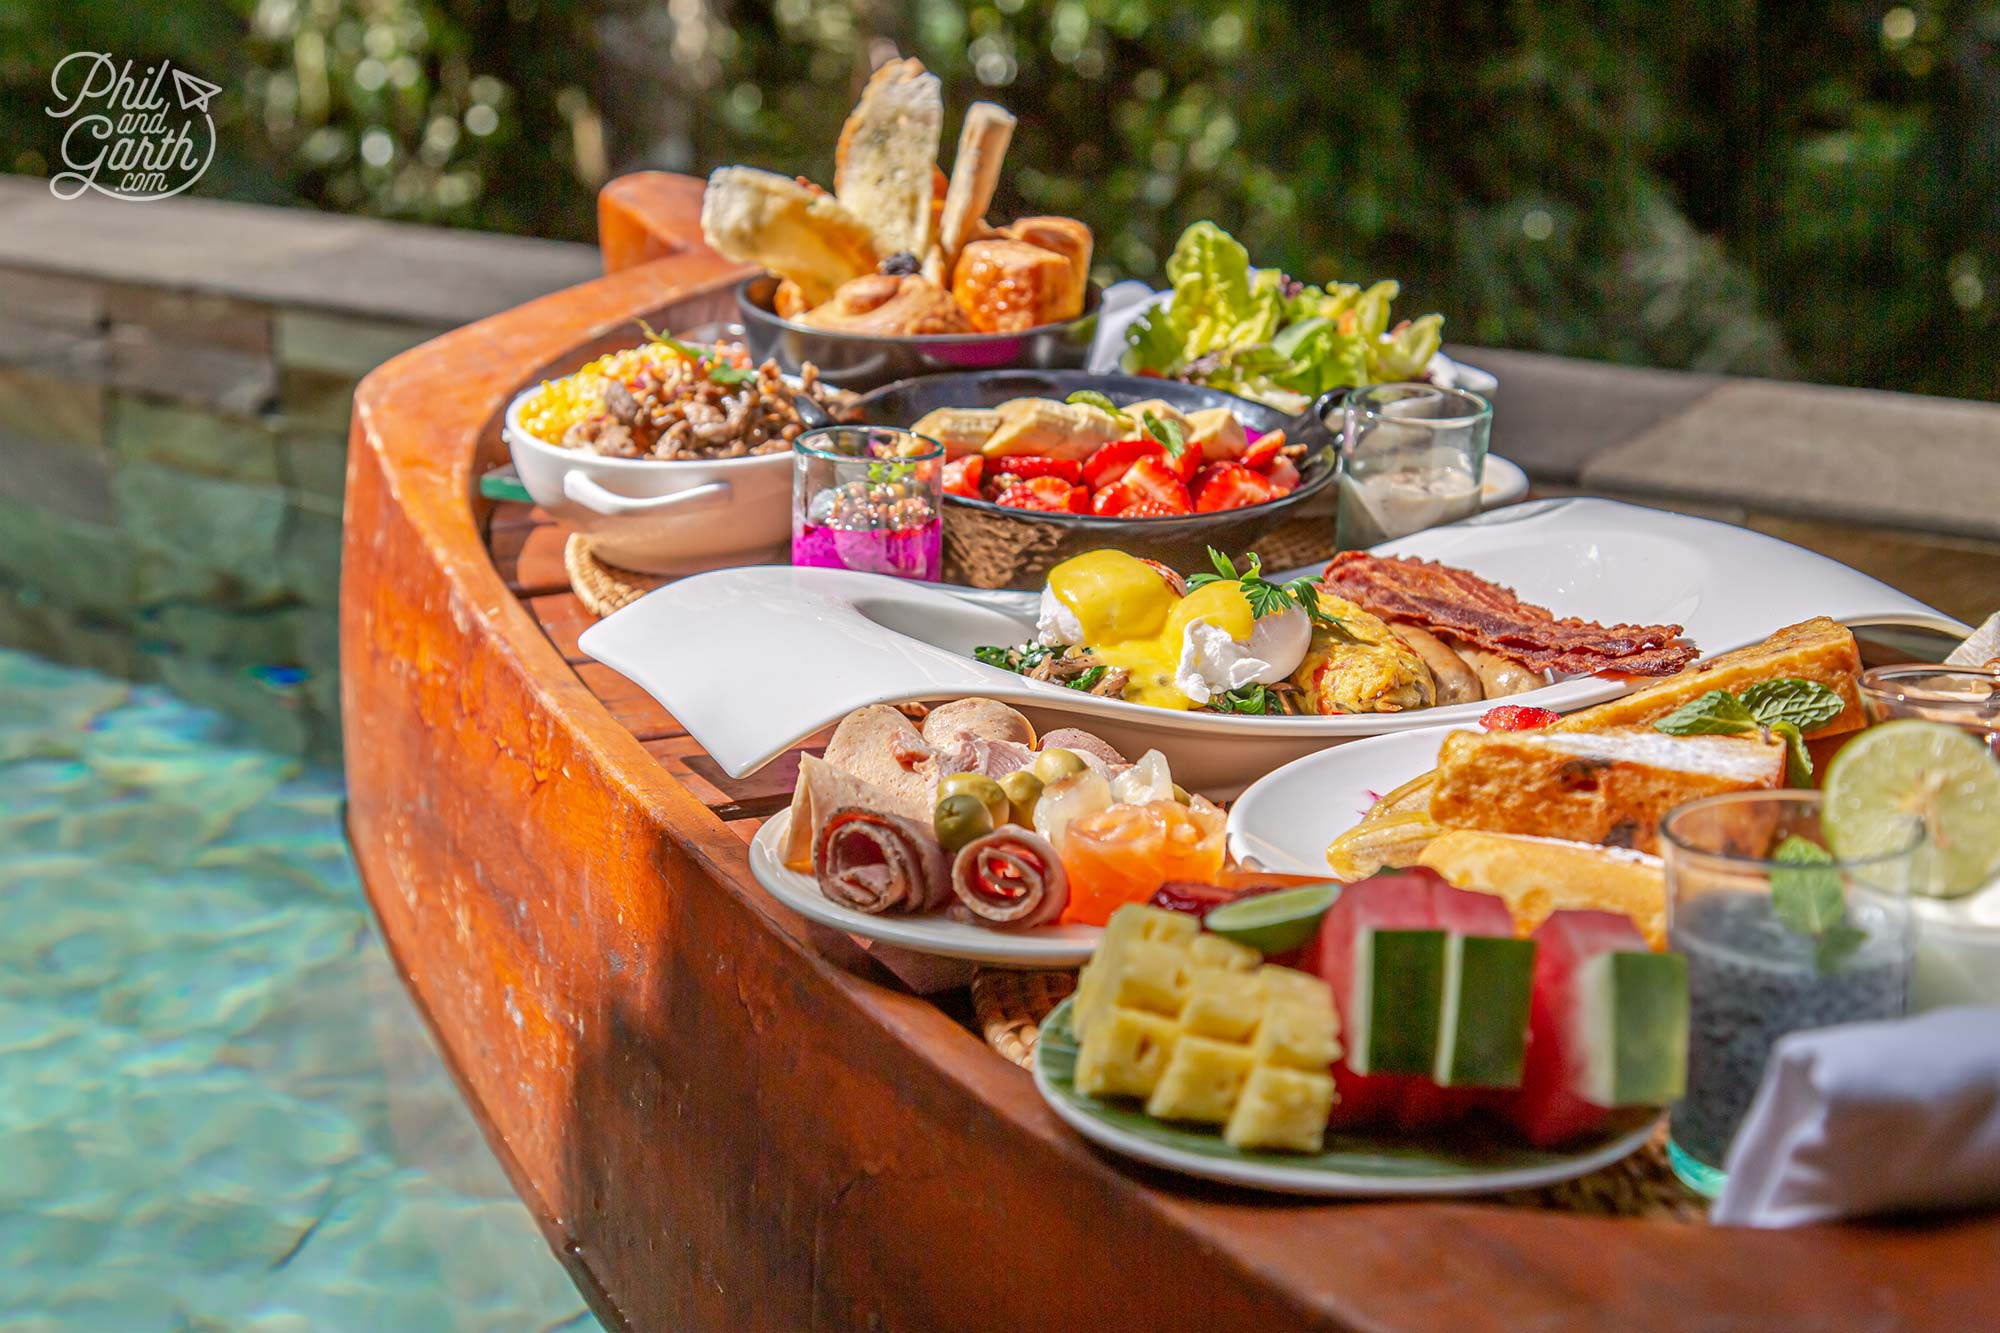 A floating breakfast in a private pool is a huge bucket list tick for us!